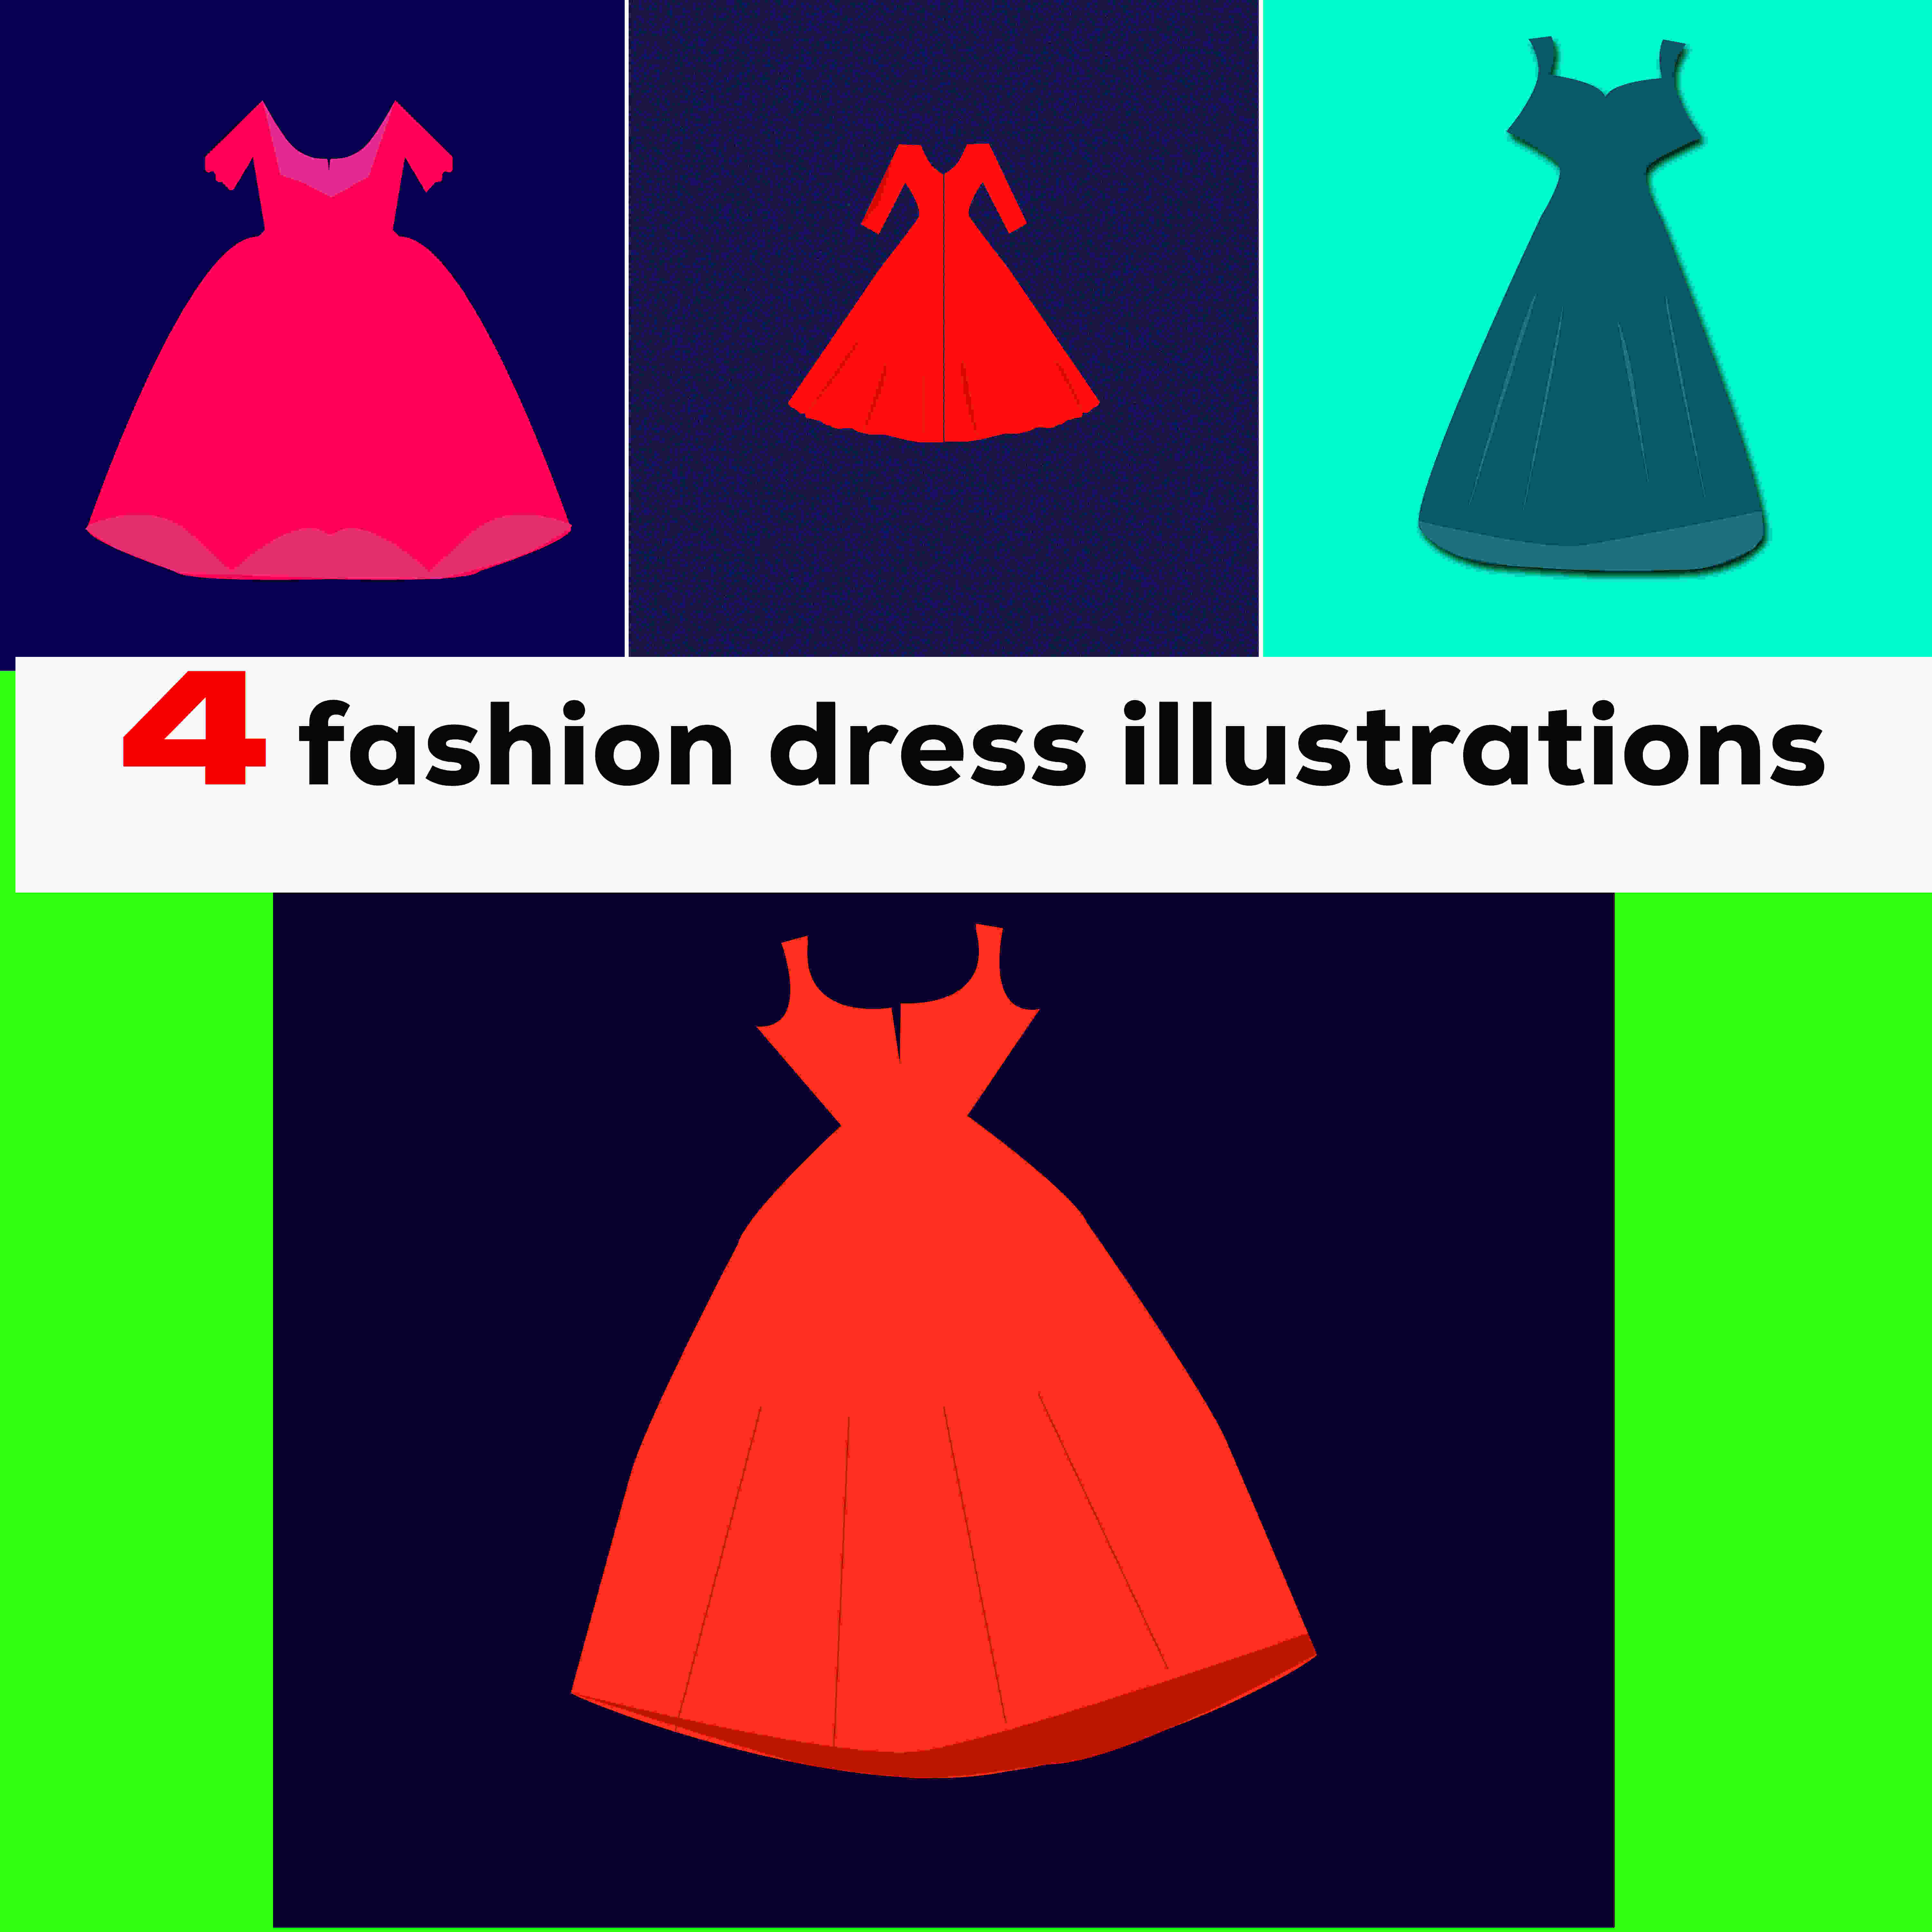 4 HIGH QUALITY VECTOR FASHION DRESS ILLUSTRATIONS cover image.